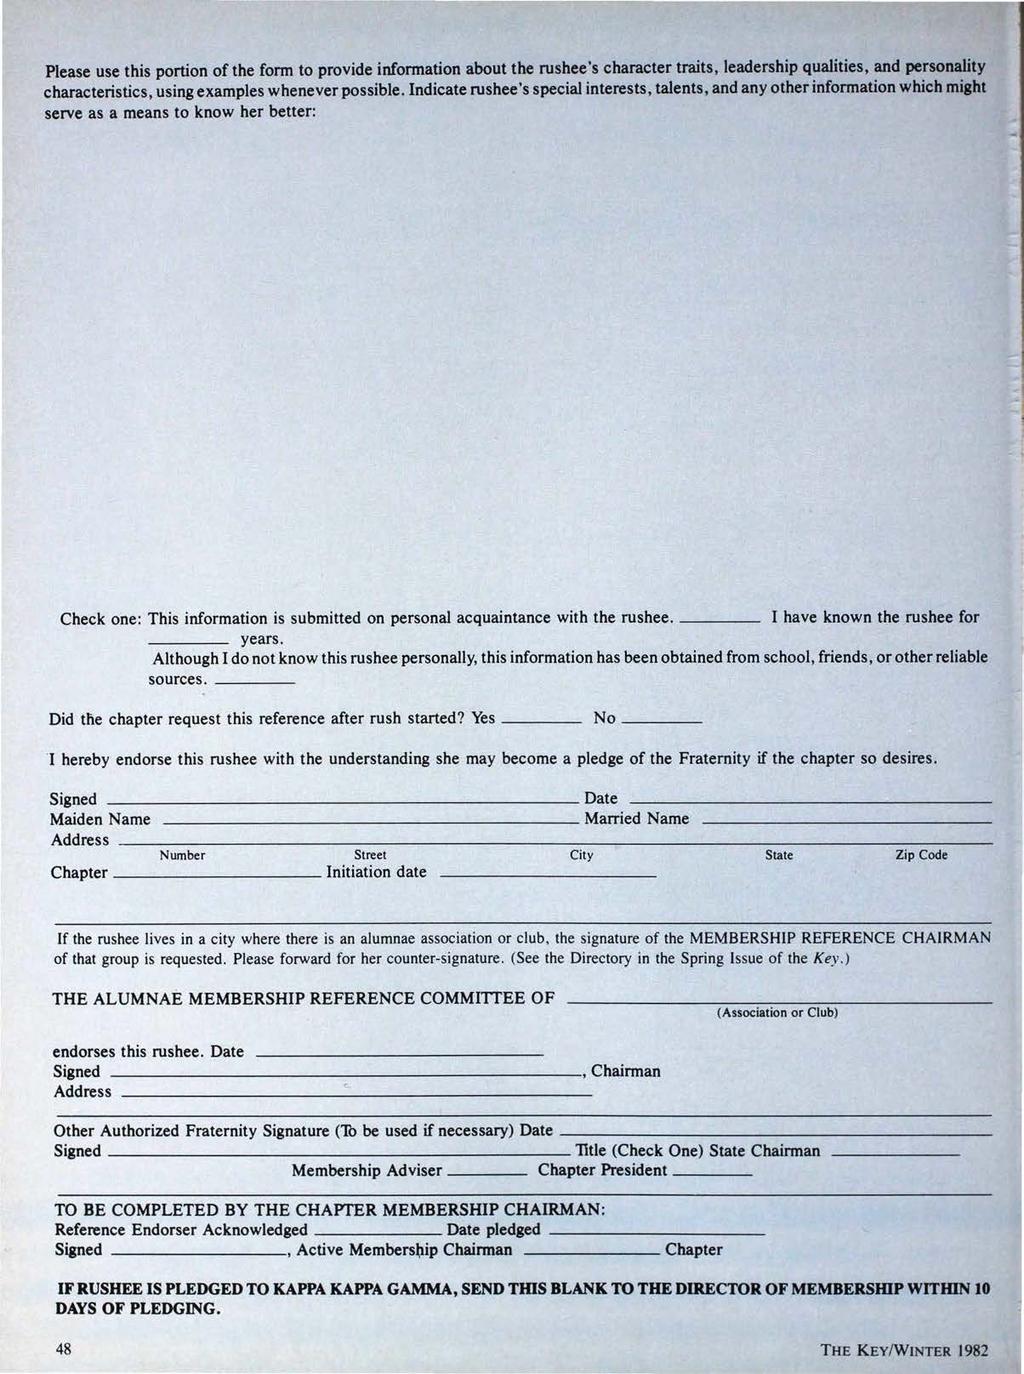 Please use this portion of the form to provide information about the rushee's character traits, leadership qualities, and personality characteristics, using examples whenever possible.